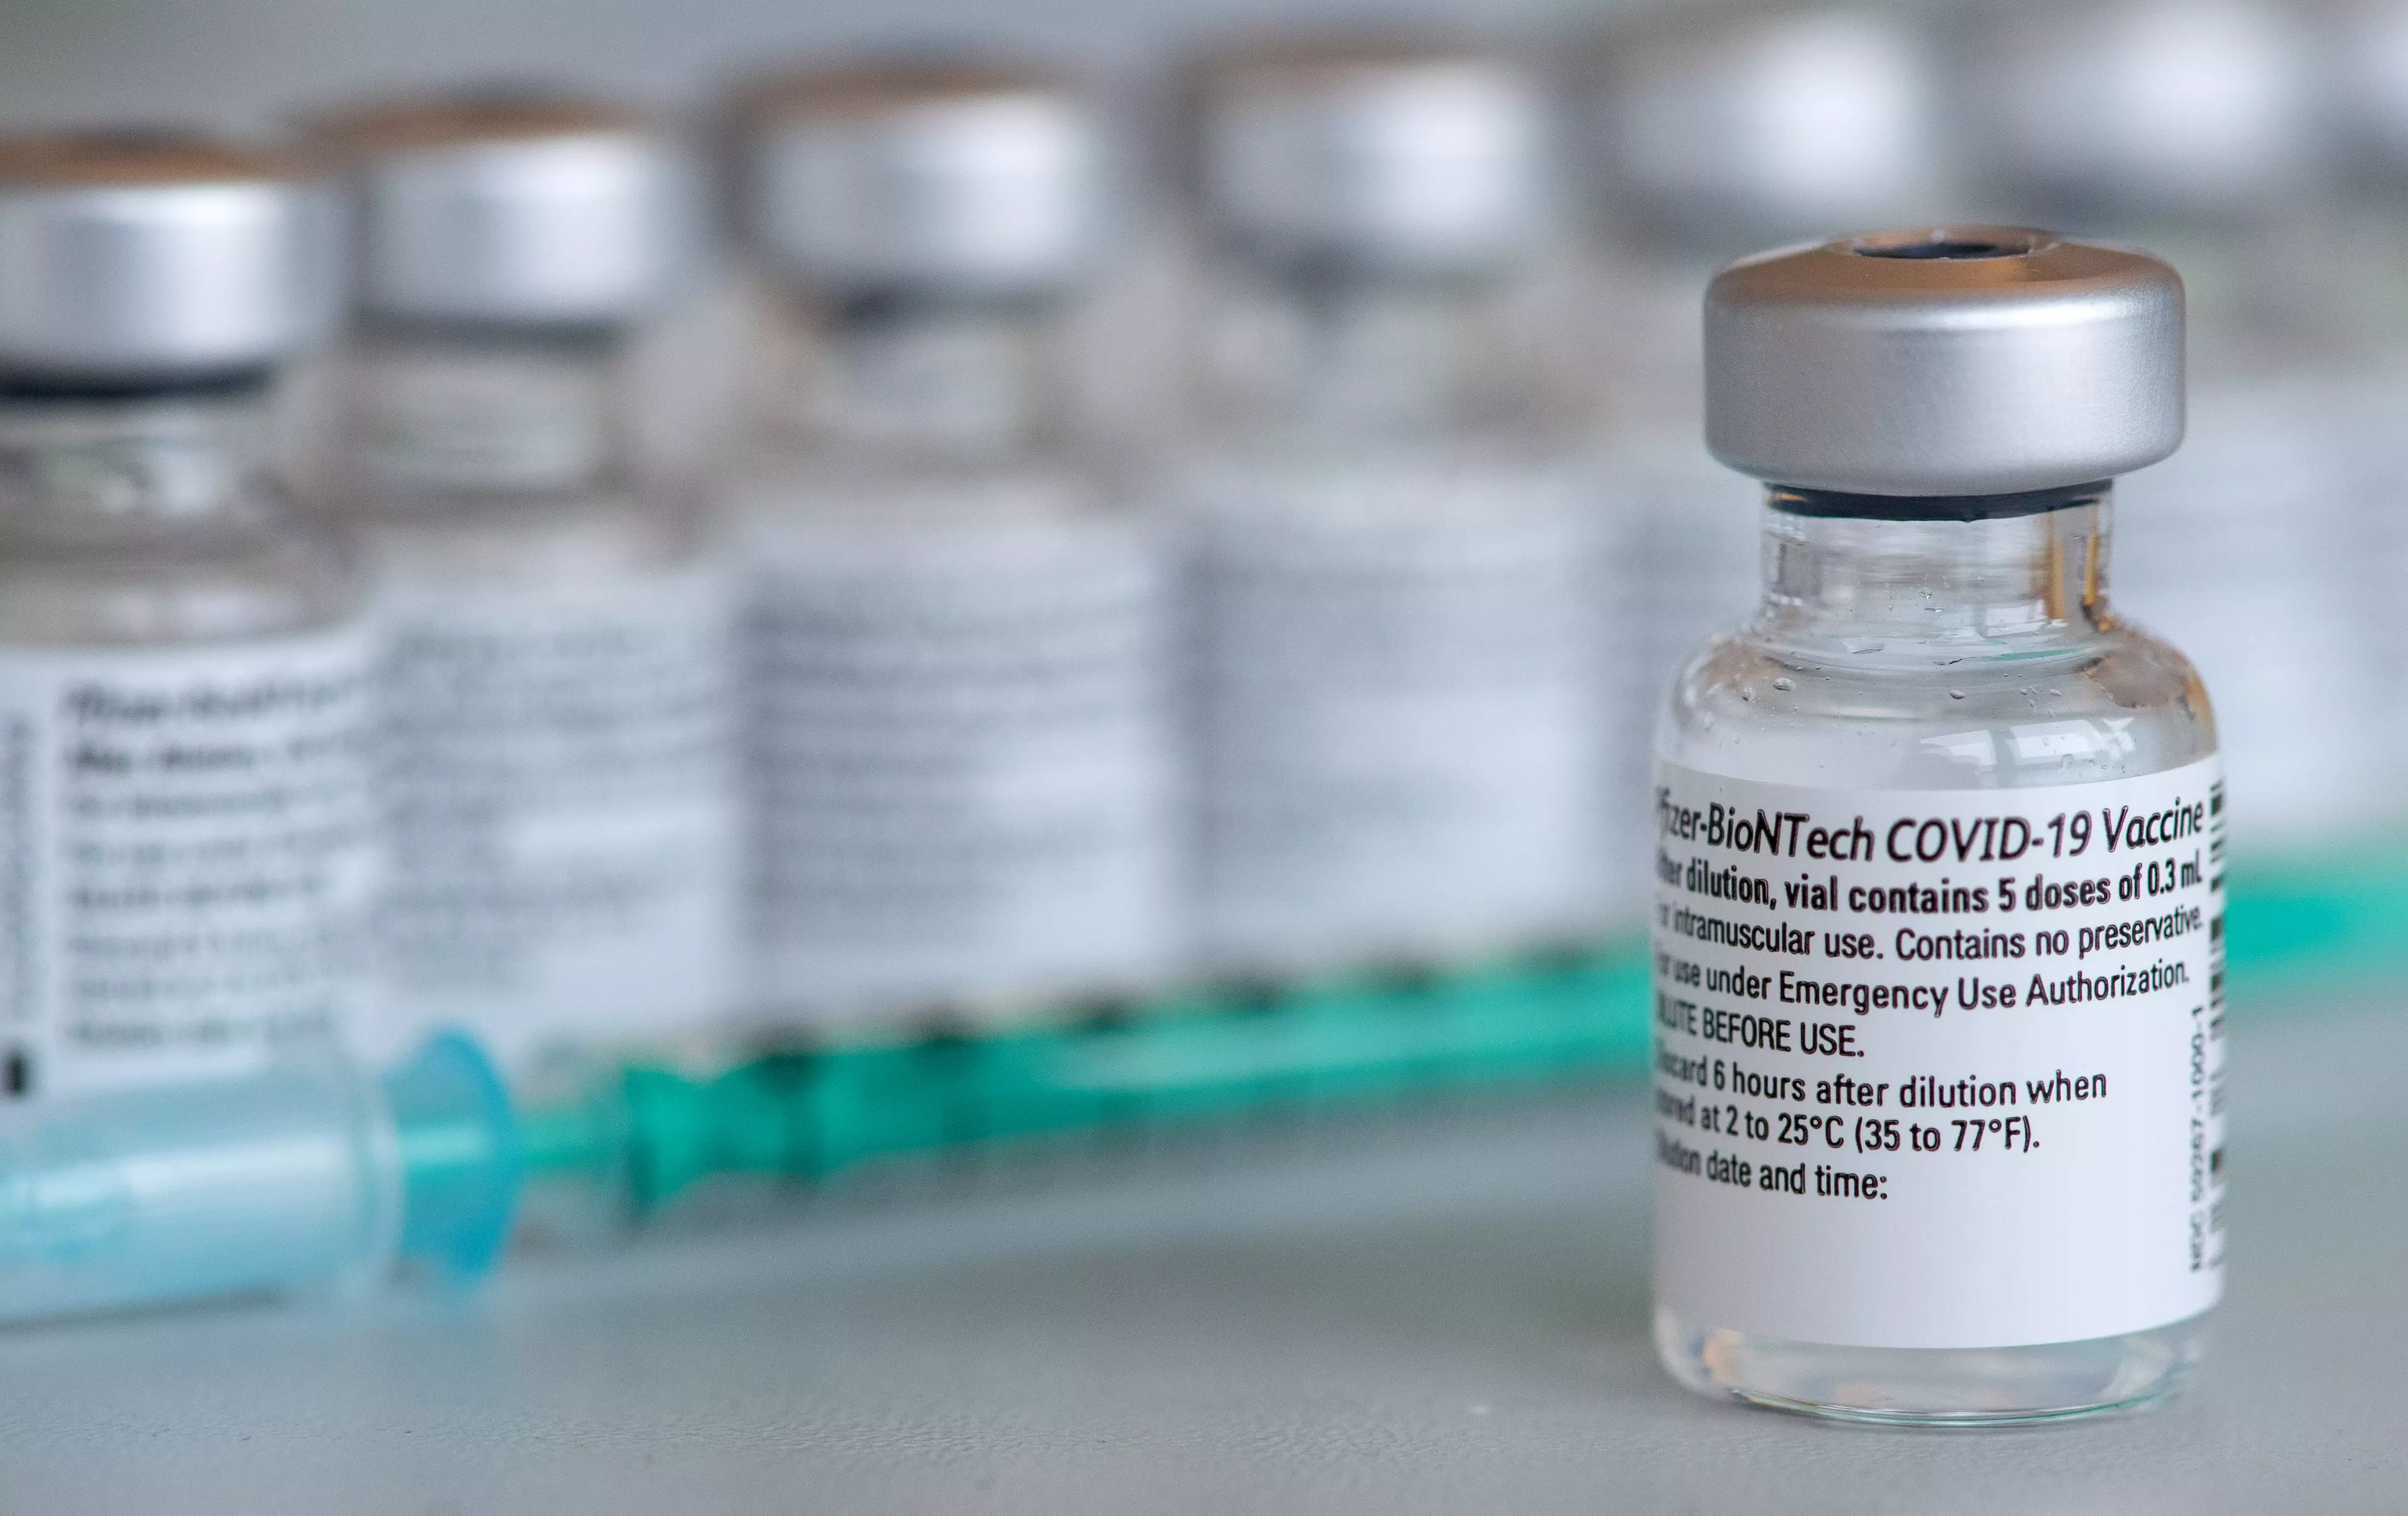 The Pfizer-BioNTech vaccine is one of several mRNA vaccines that have been developed.